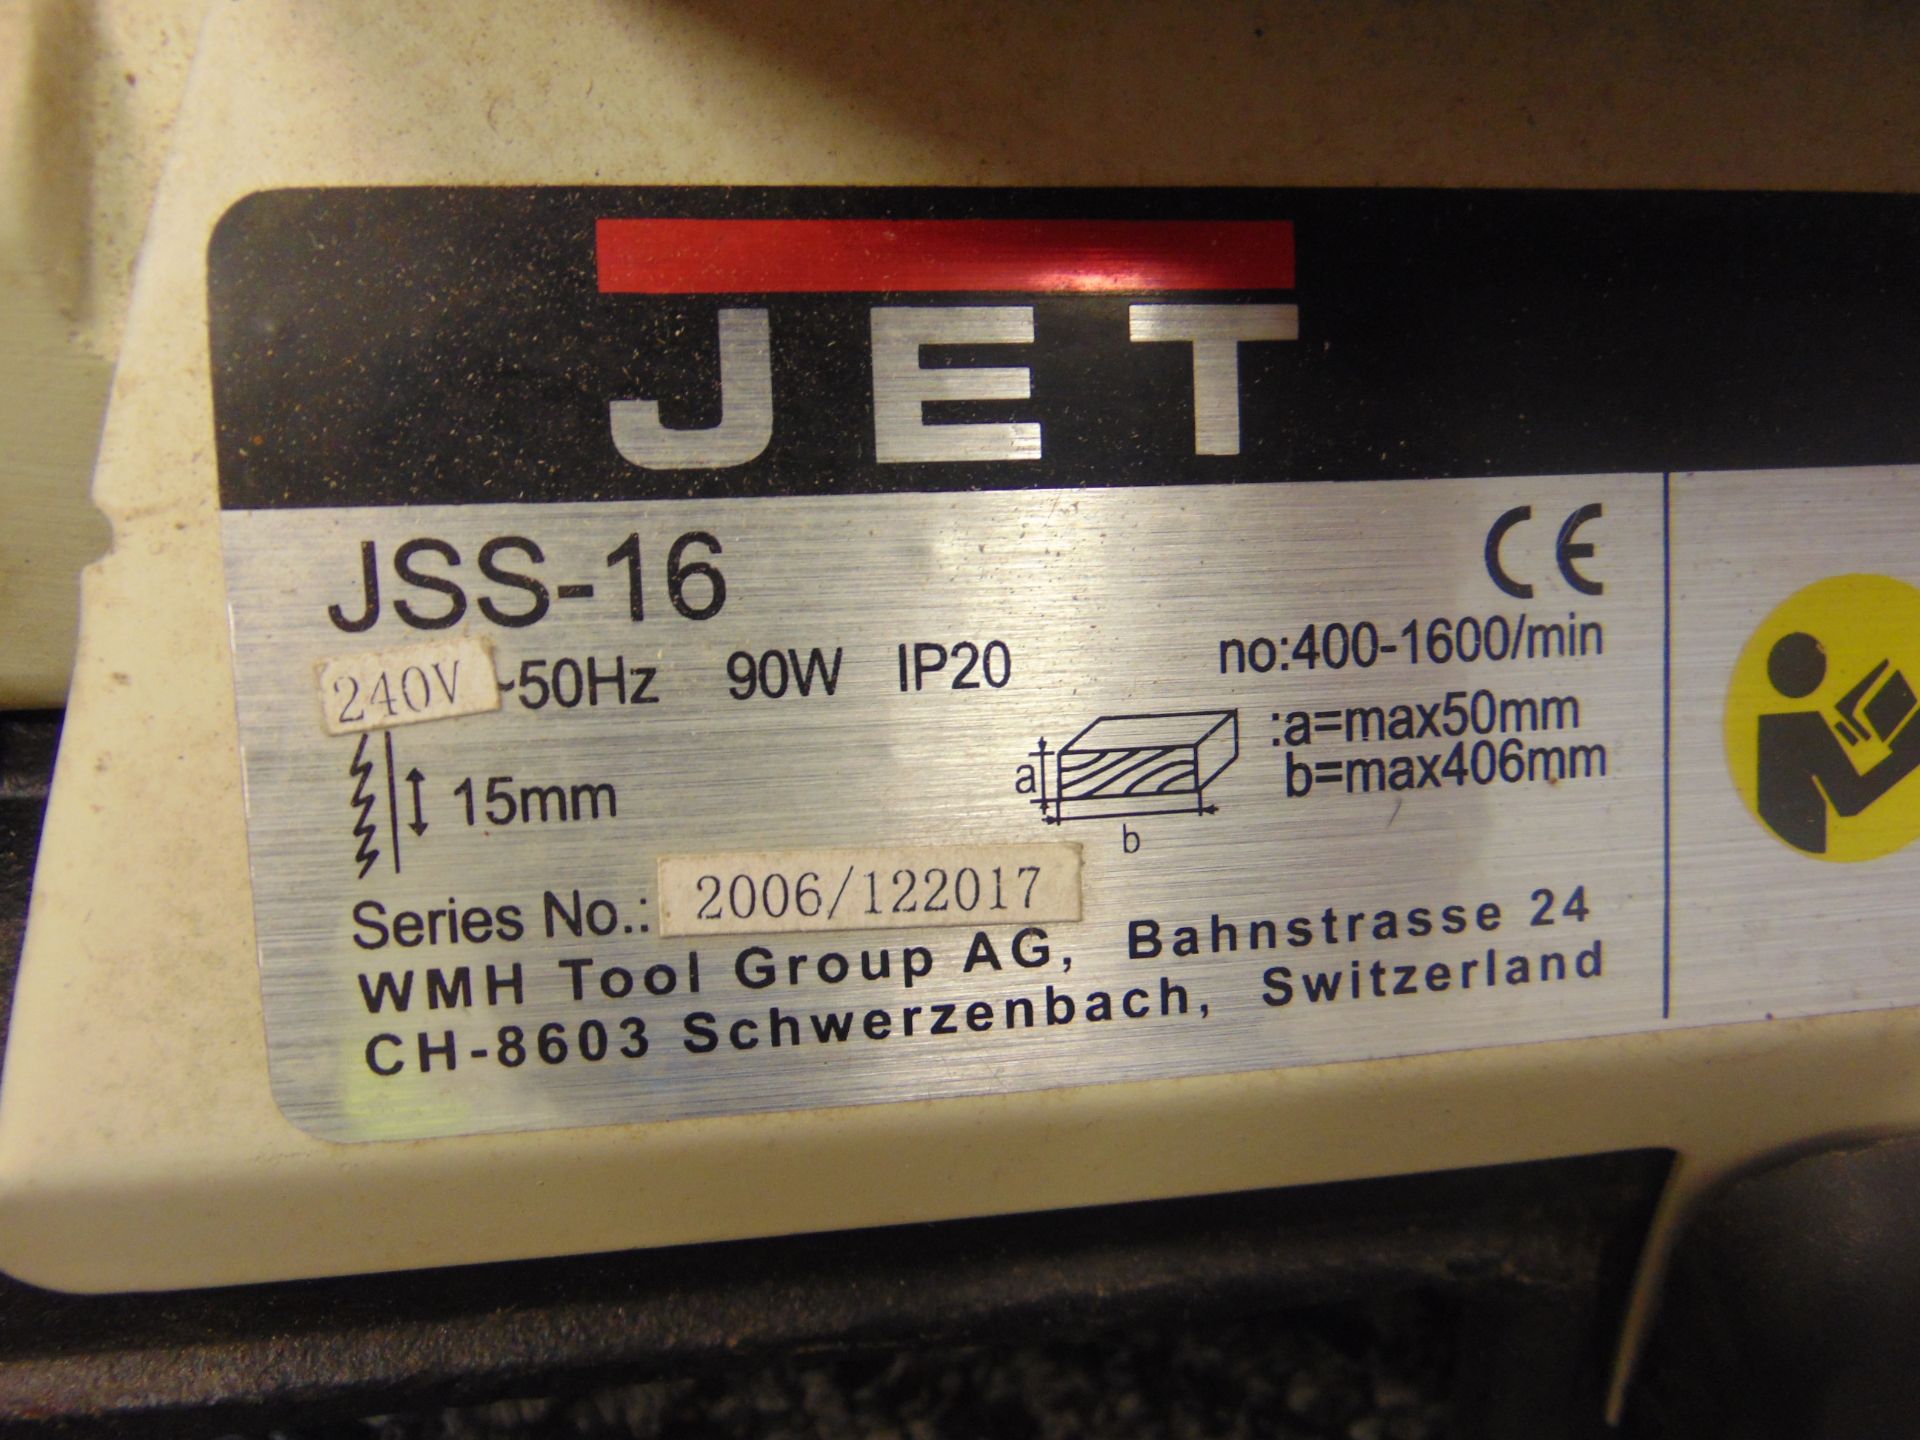 Jet JSS-16 Benchtop Variable Speed Scroll Saw - Image 6 of 6